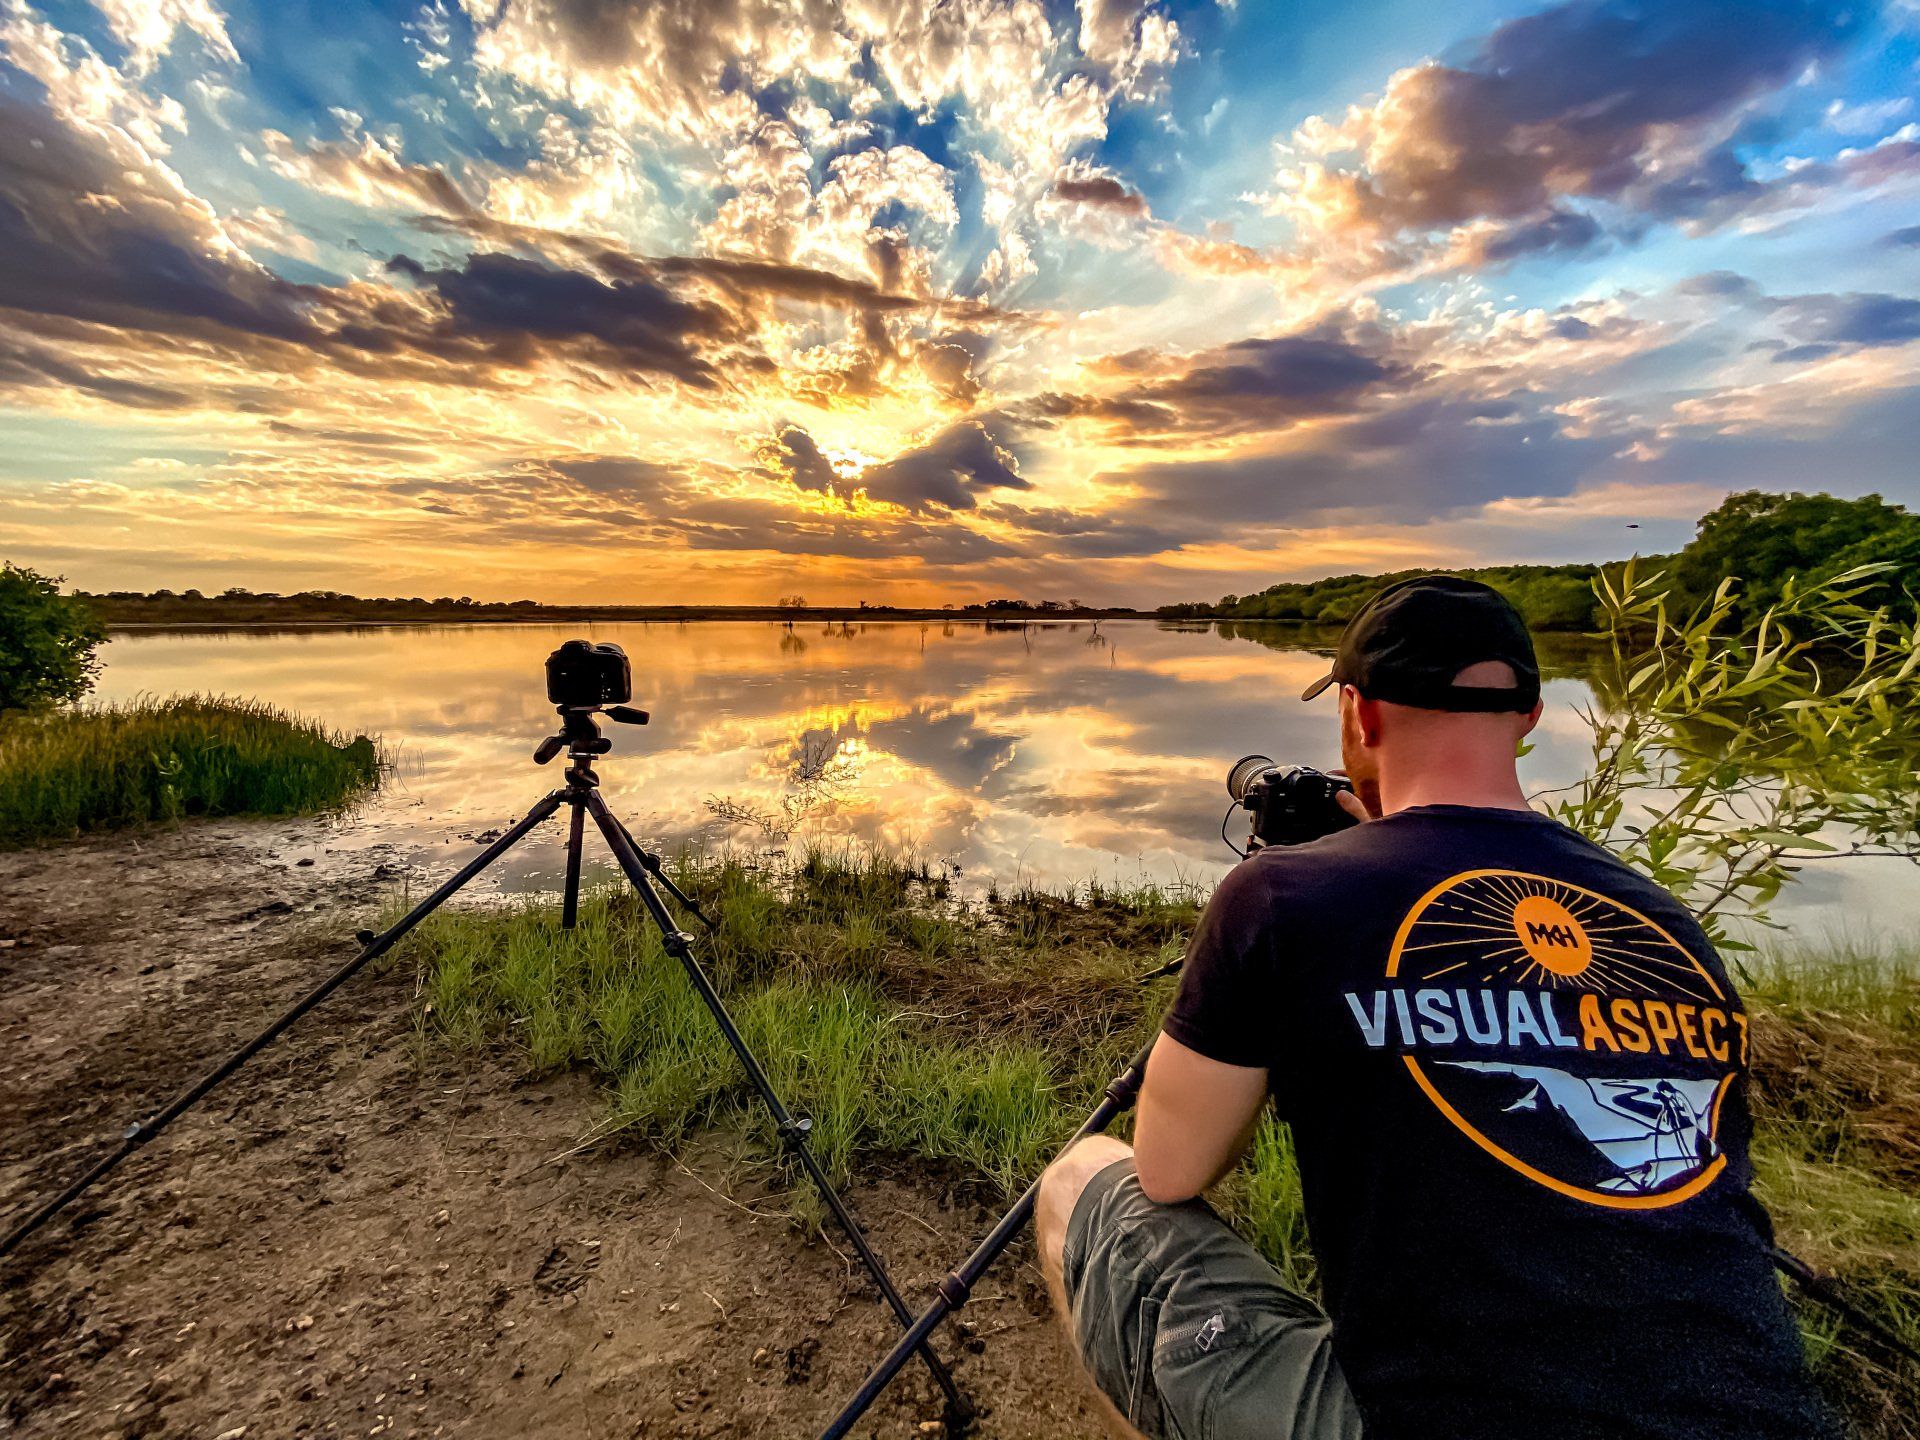 A man is taking a picture of a sunset over a lake.